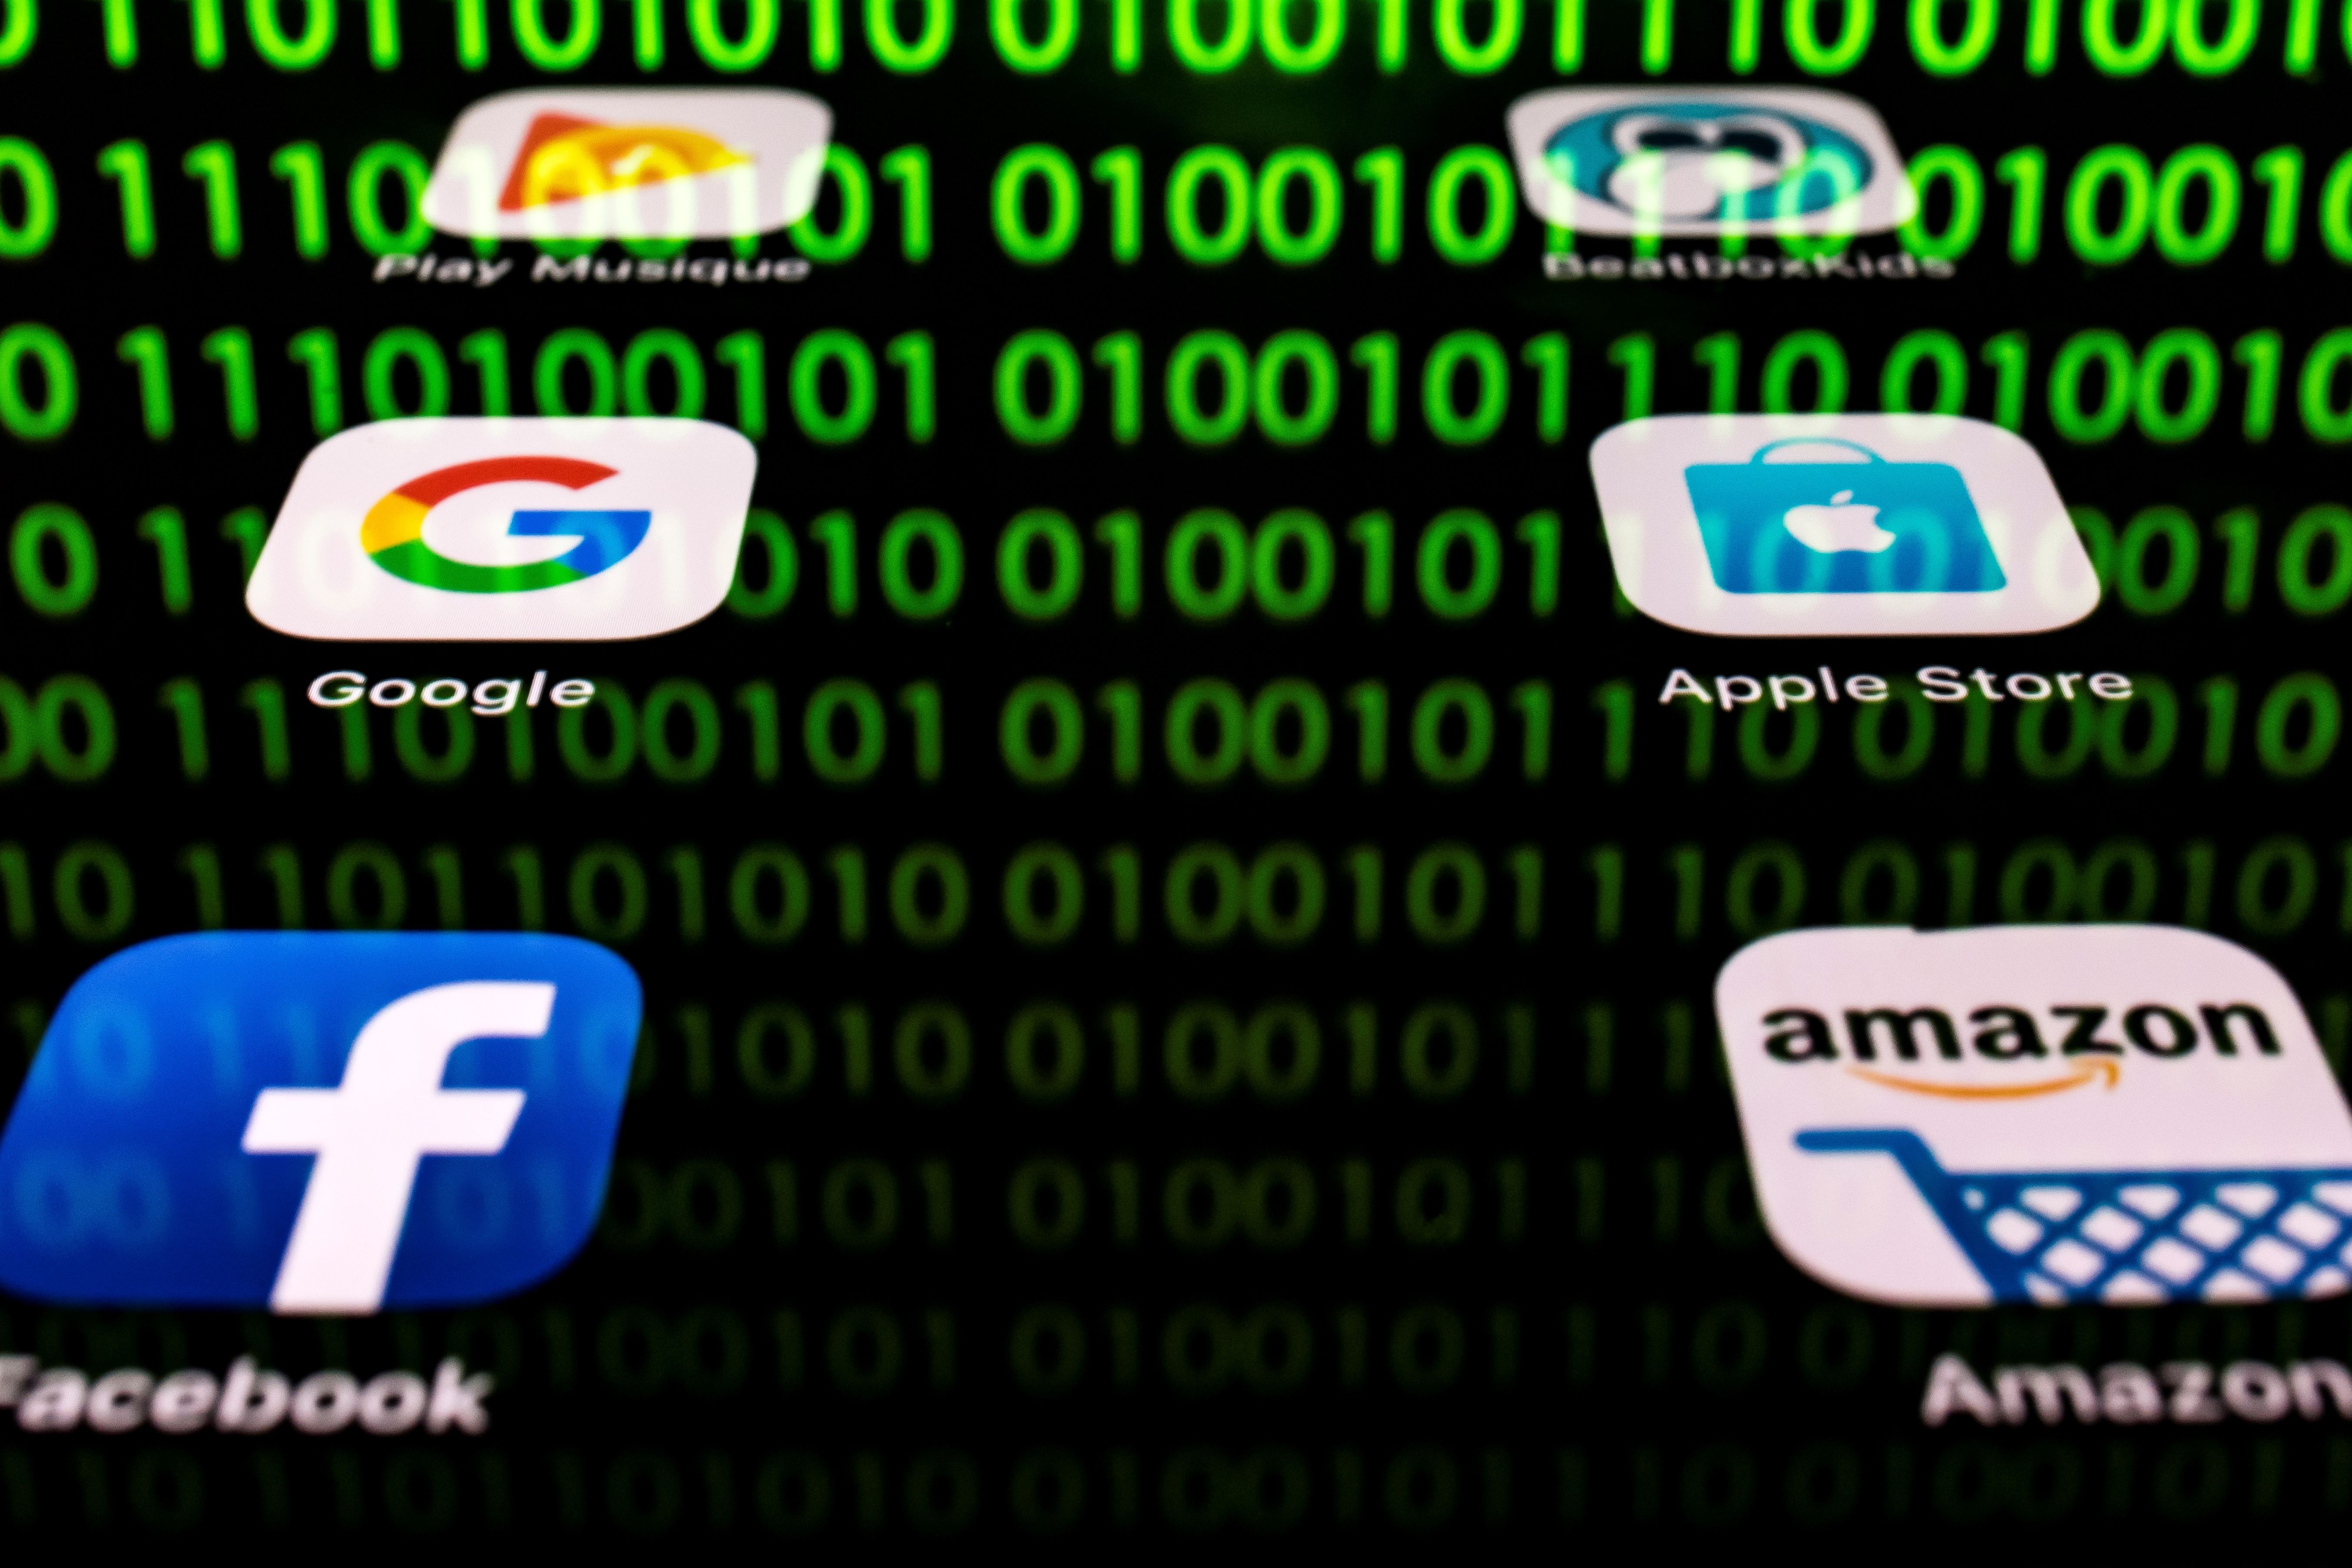 This illustration picture taken on April 20, 2018 in Paris shows apps for Google, Amazon, Facebook, Apple (GAFA) and the reflexion of a binary code displayed on a tablet screen. (LIONEL BONAVENTURE/AFP/Getty Images)